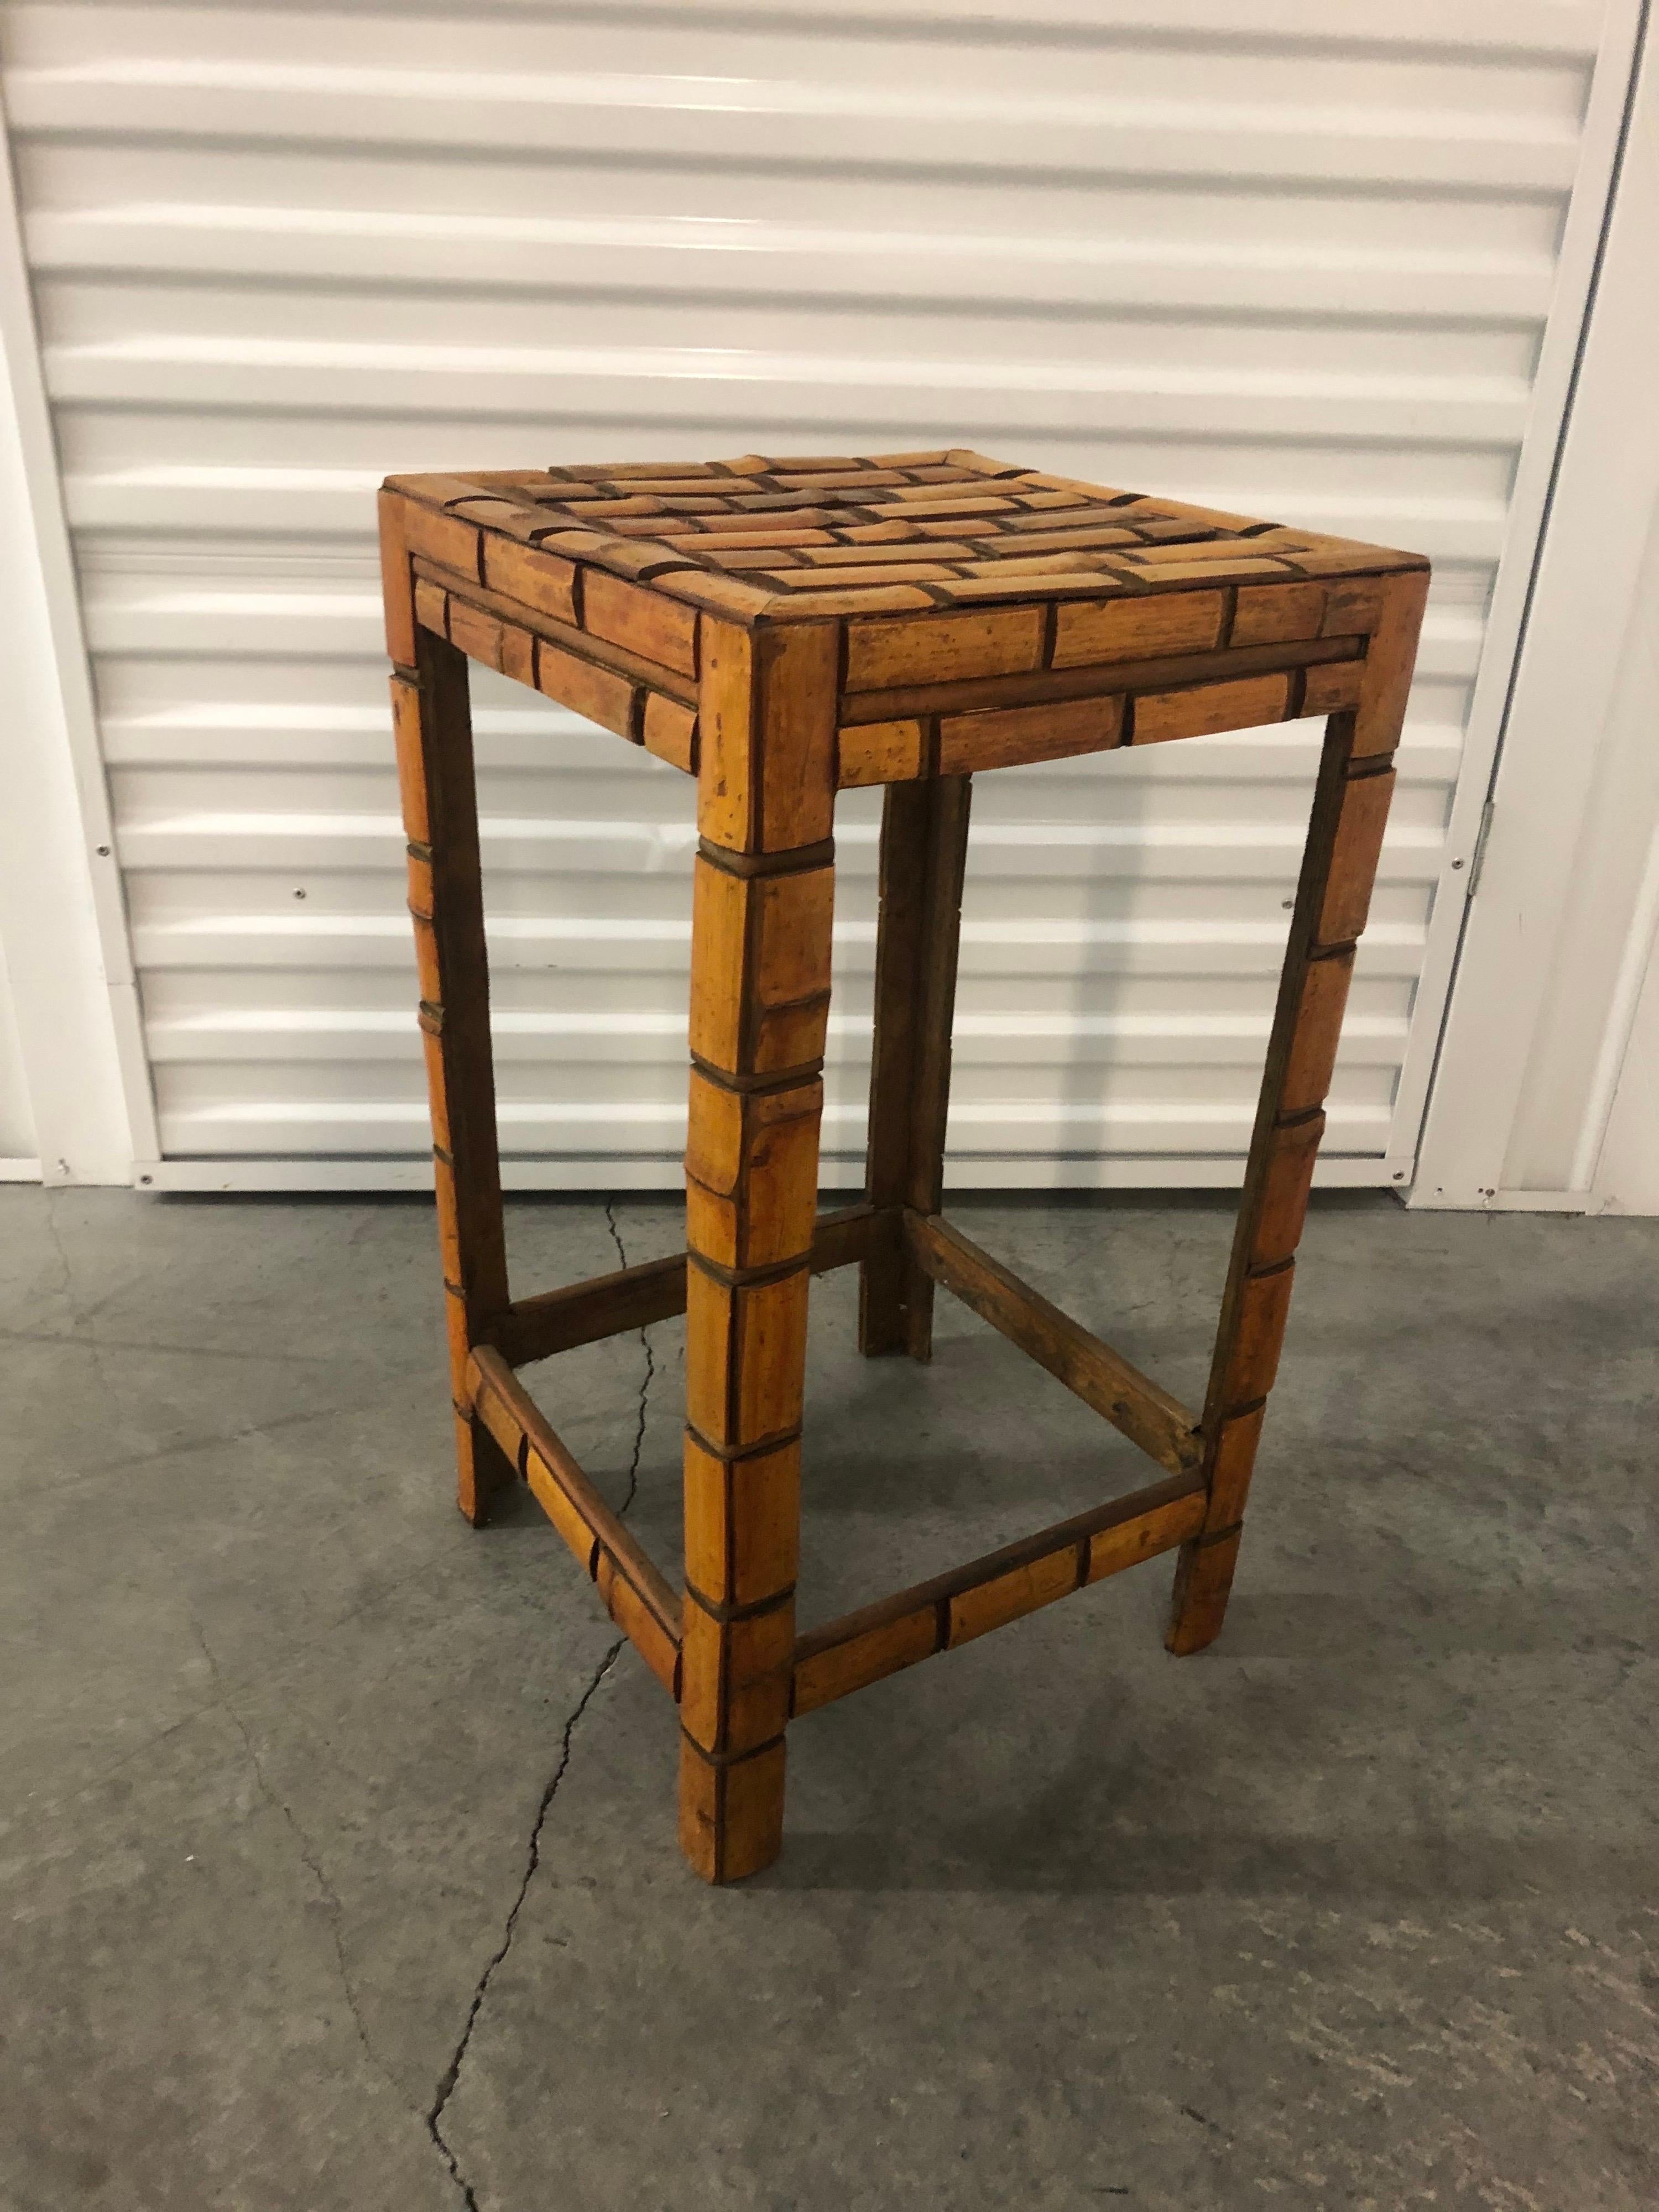 Slatted Asian bamboo side table or stand.
Size: 14.5